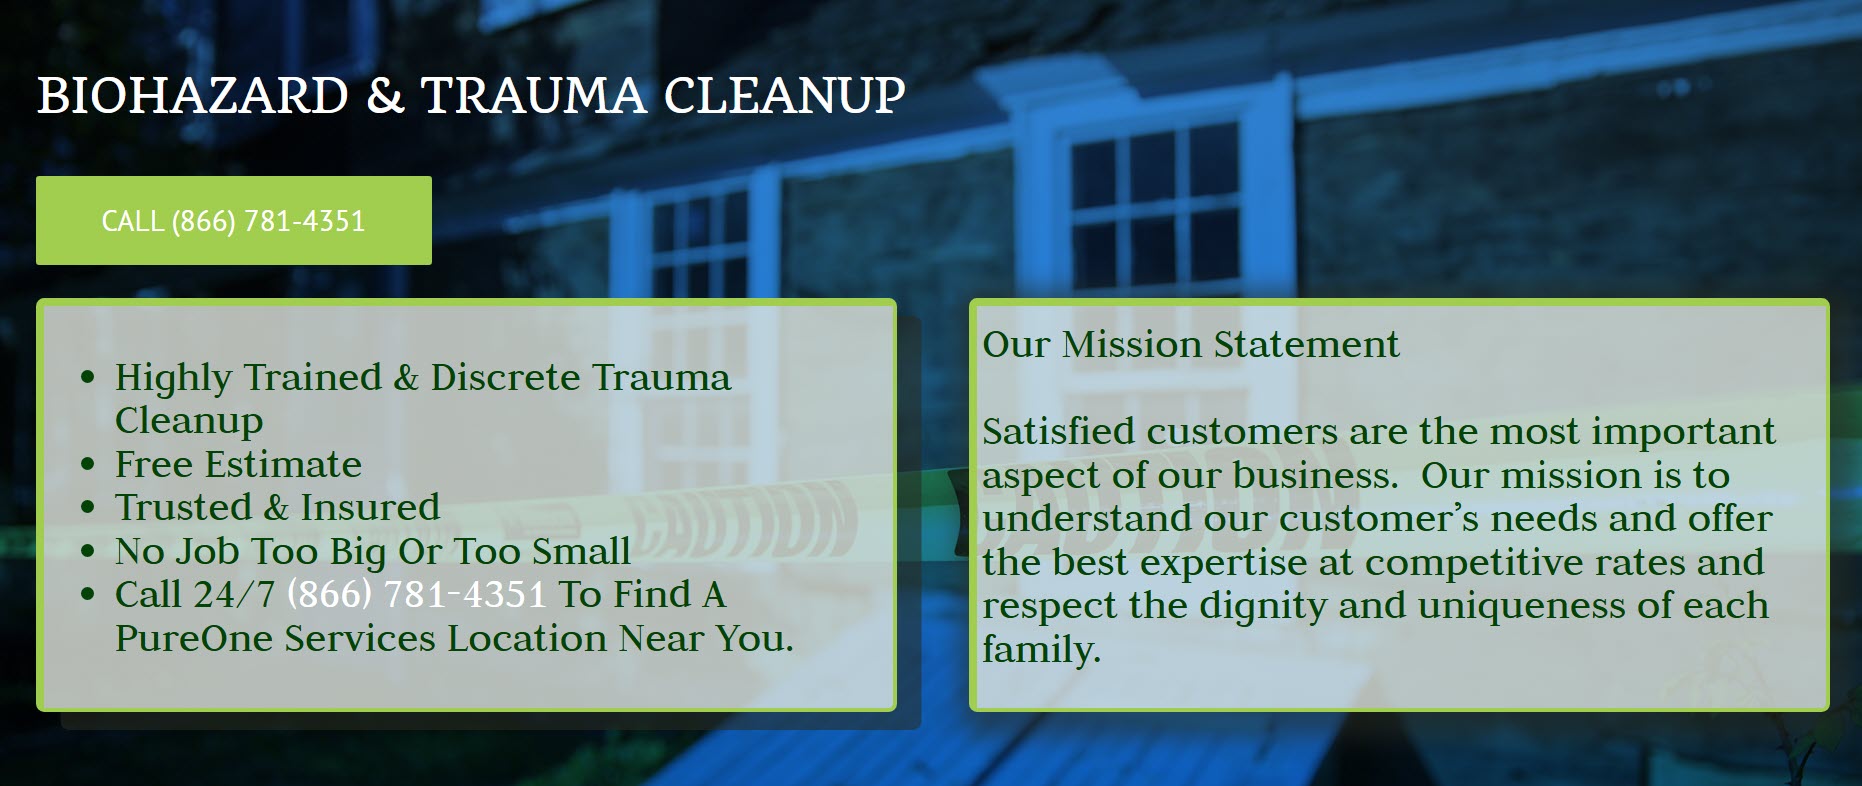 A biohazard, water damage restoration, and trauma cleanup service advertisement featuring a contact number, services including trauma cleanup, mold restoration and free estimates. The company's mission statement emphasizes customer satisfaction. -PureOneServices